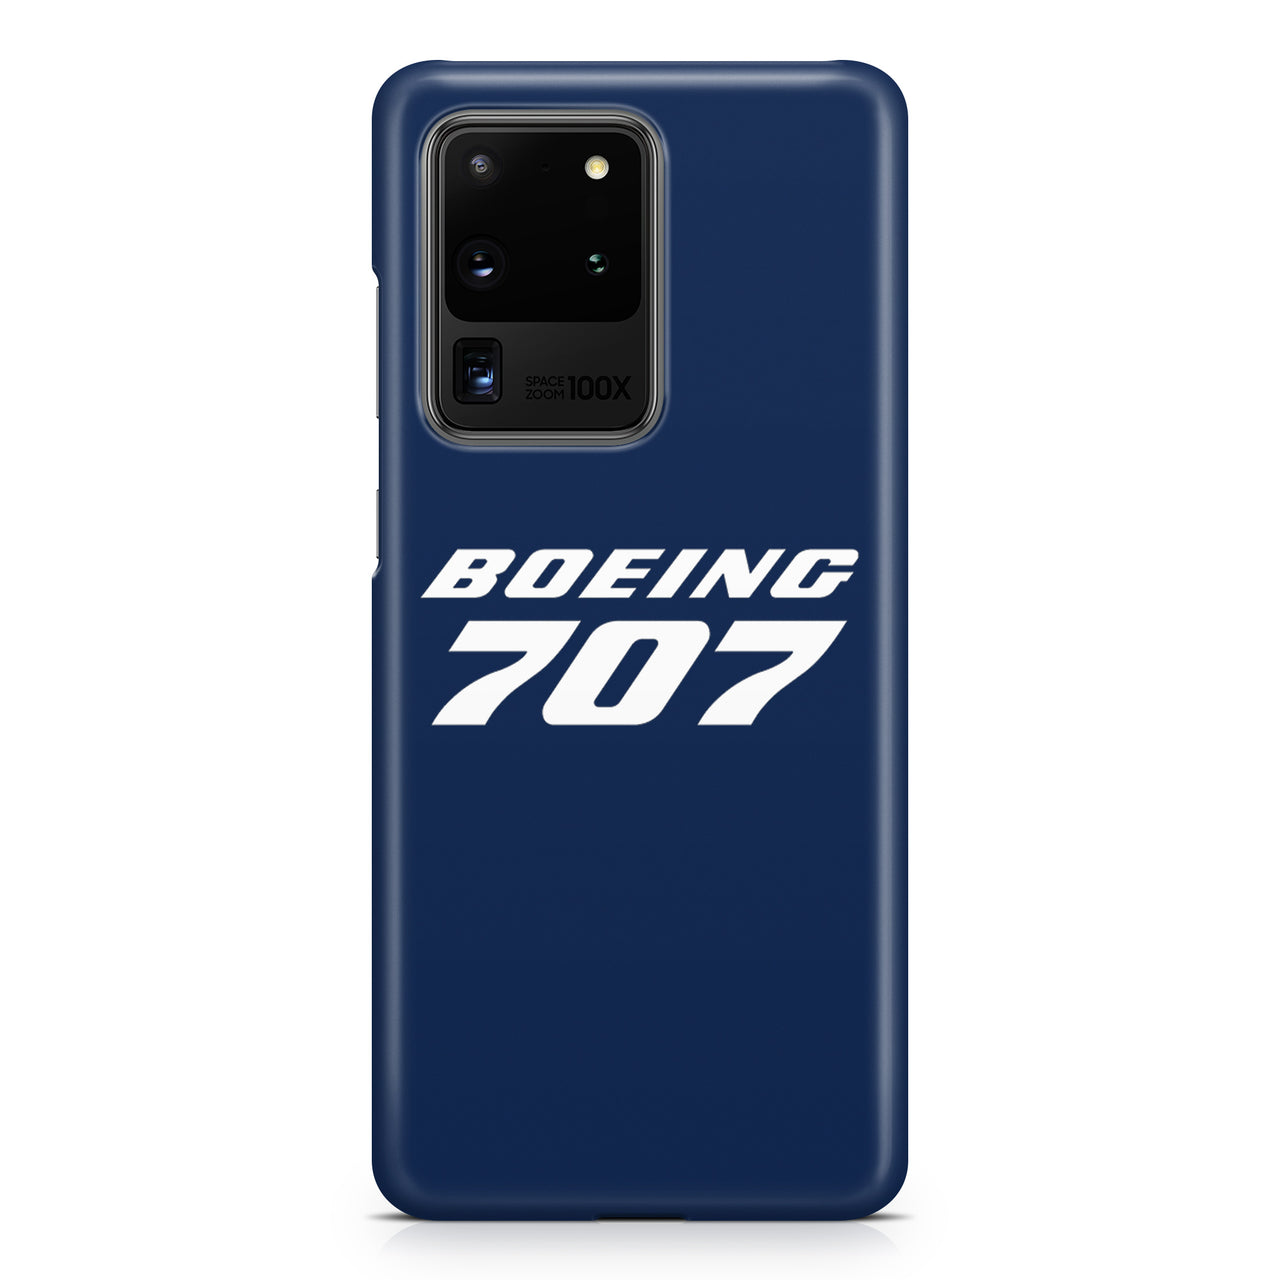 Boeing 707 & Text Samsung A Cases